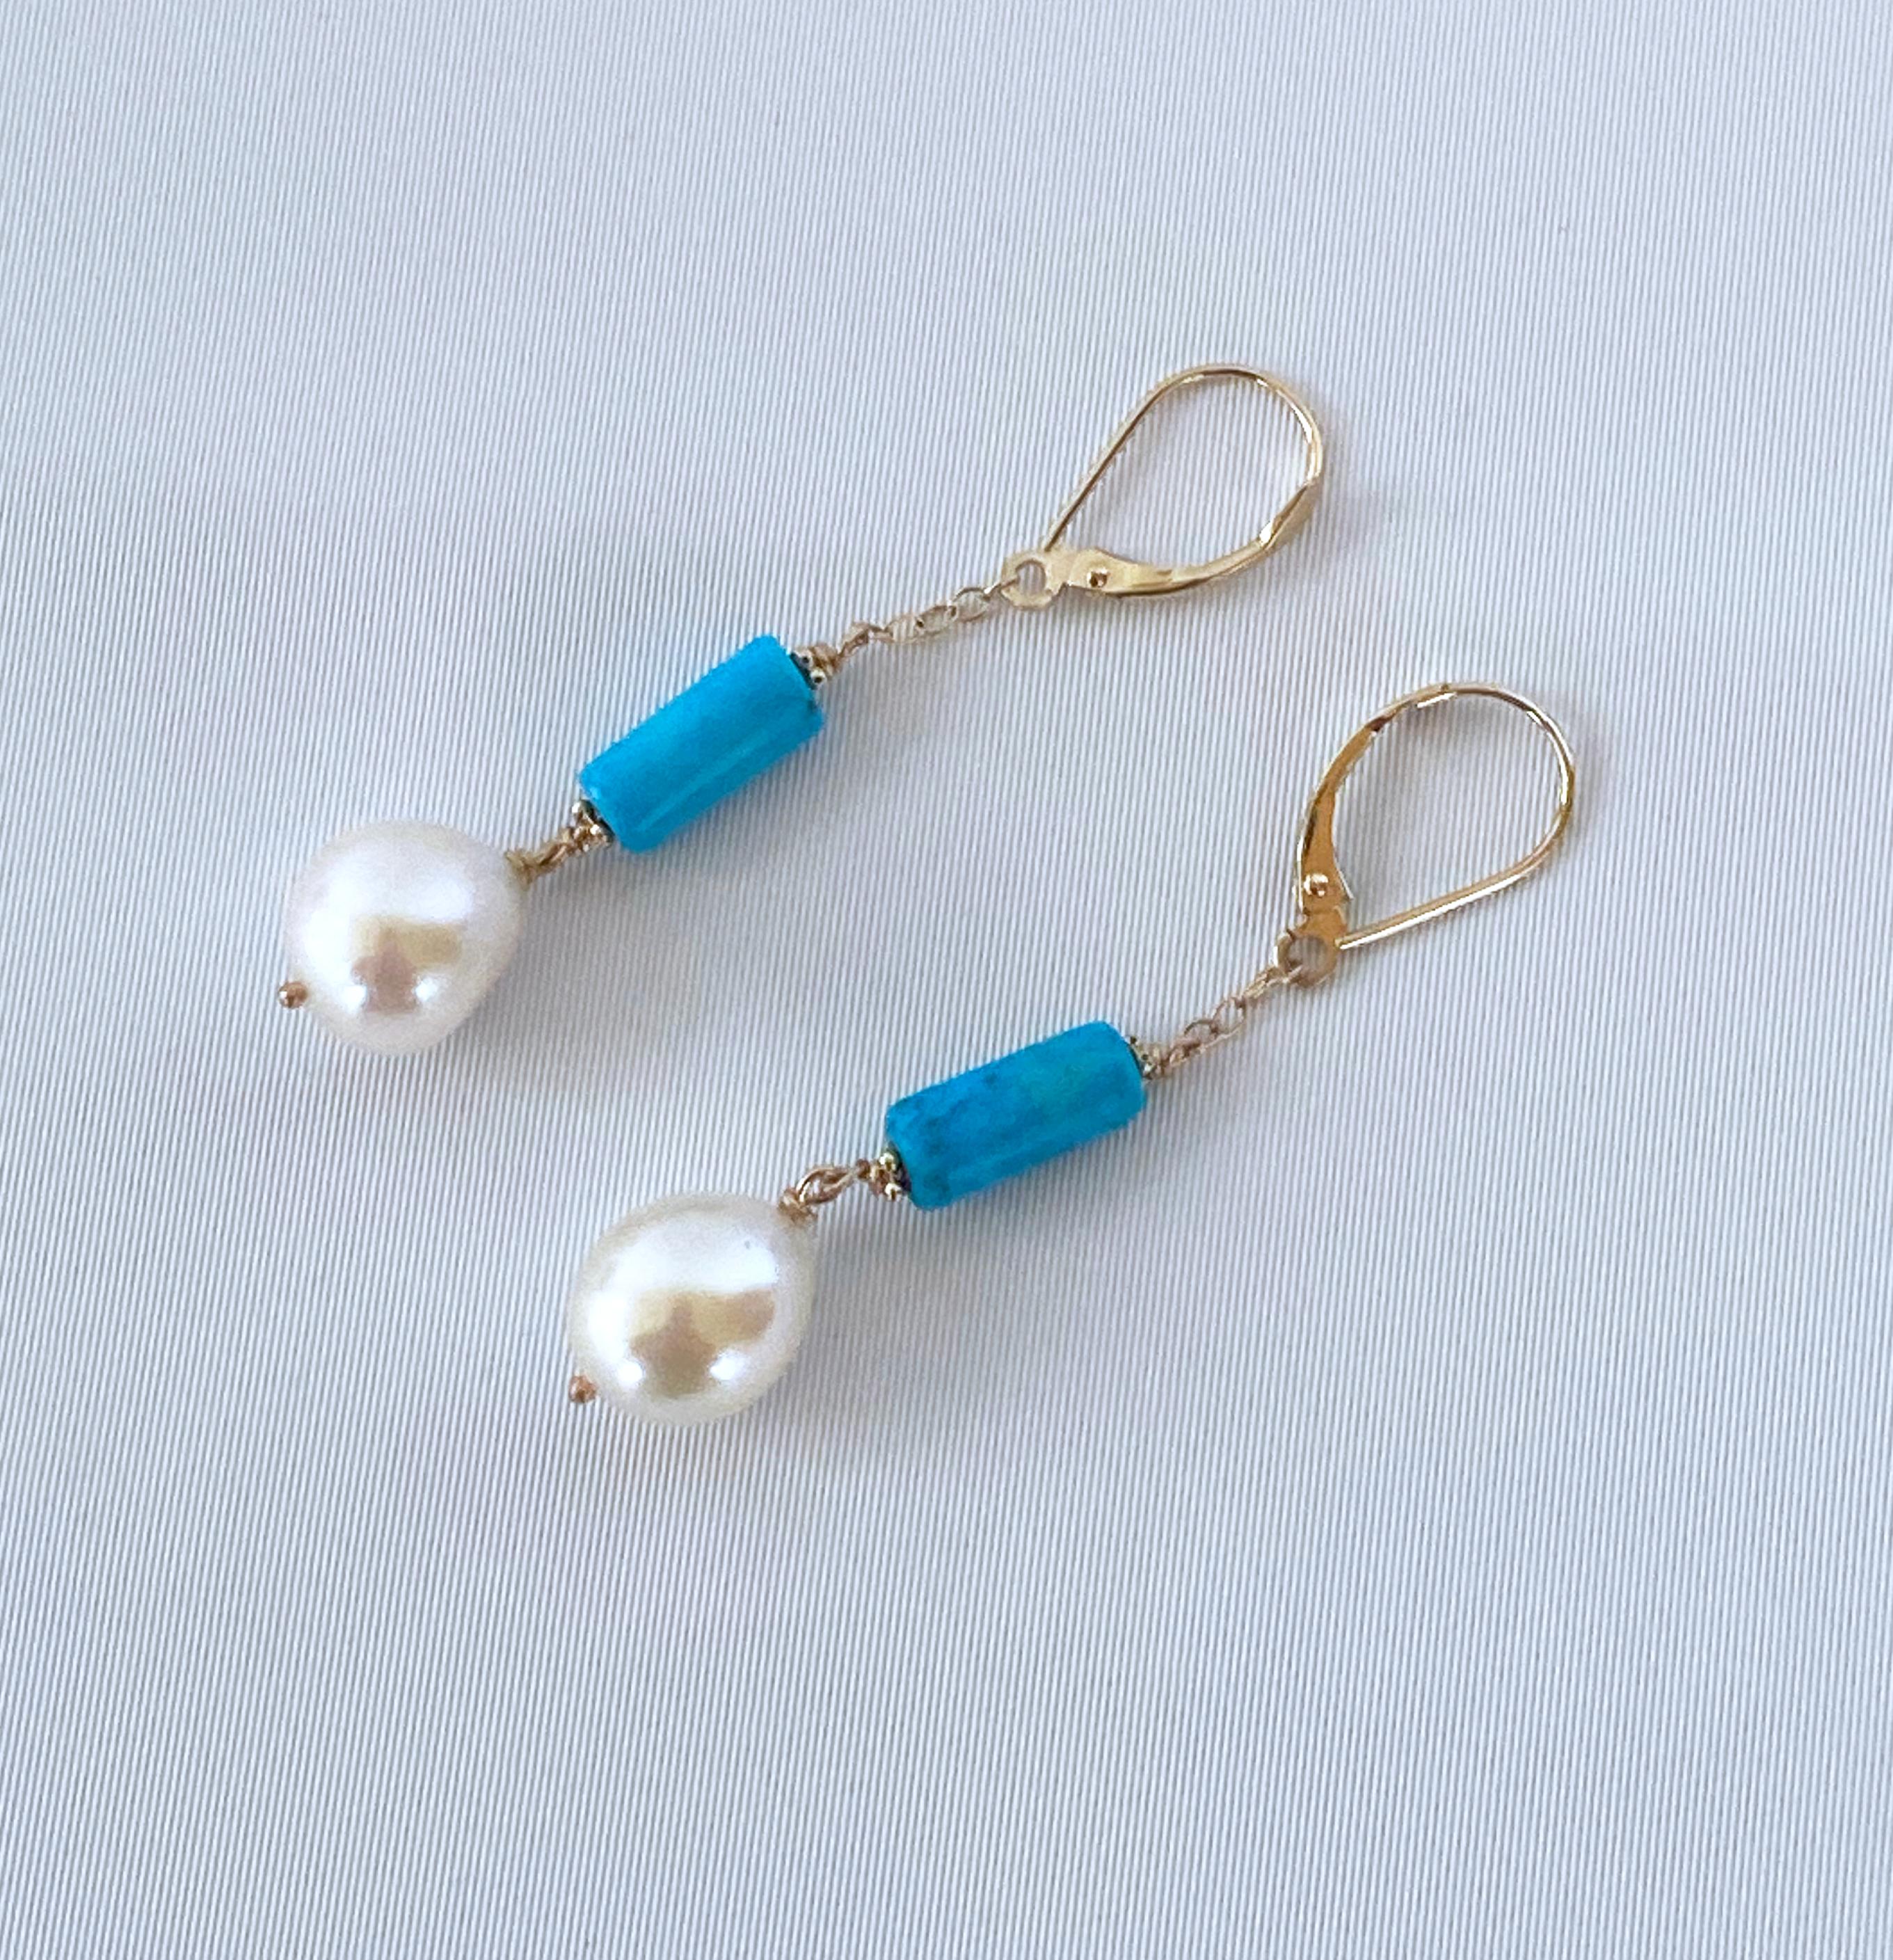 Simple yet bold pair of earrings from Marina J. These lovely earrings are made of all solid 14k Yellow Gold Lever Back hooks, chain and wiring. Each Earring features a high luster Pear shaped Pearl hanging from 14k Gold chain beneath a cylindrical,